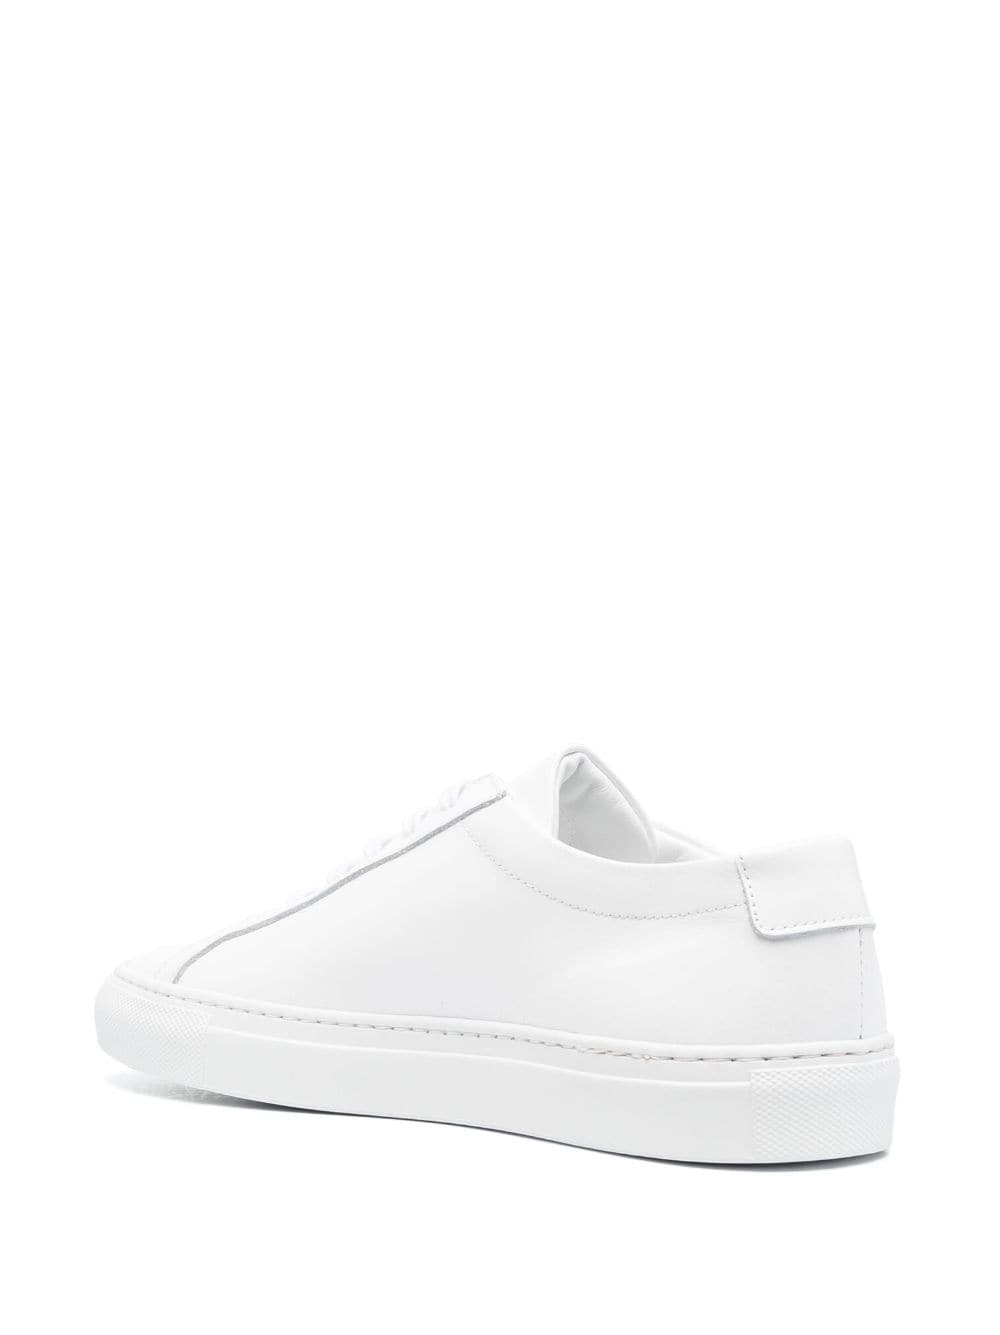 COMMON PROJECTS ARTICLE37010506 WHITE  Synthetic->Carbon